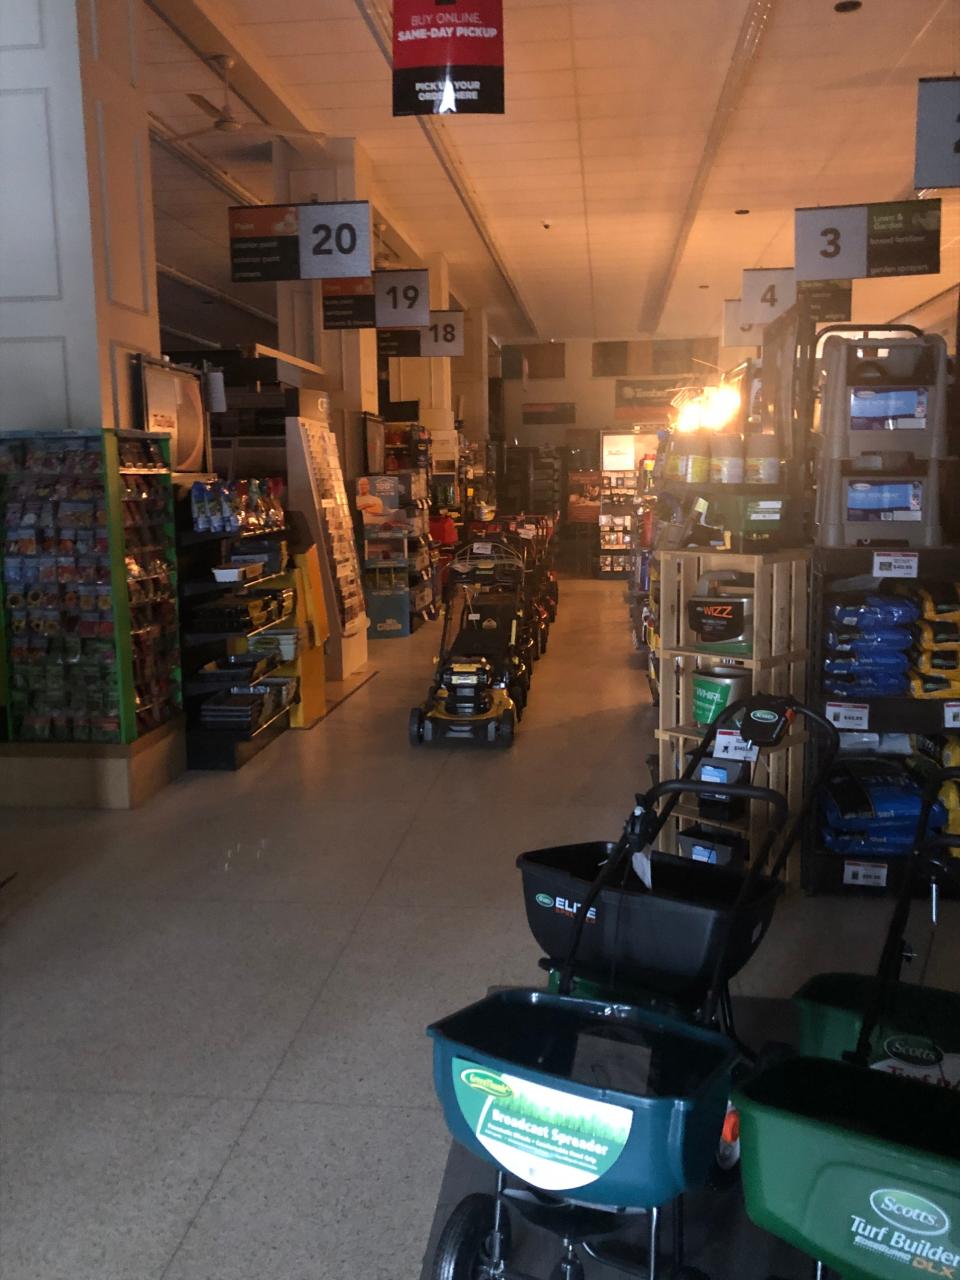 Mohler True Value Home Center in Jackson Township is using a combination of a power generator, flashlights and some porch lights to stay illuminated for customers since a storm knocked out electricity there on Saturday.